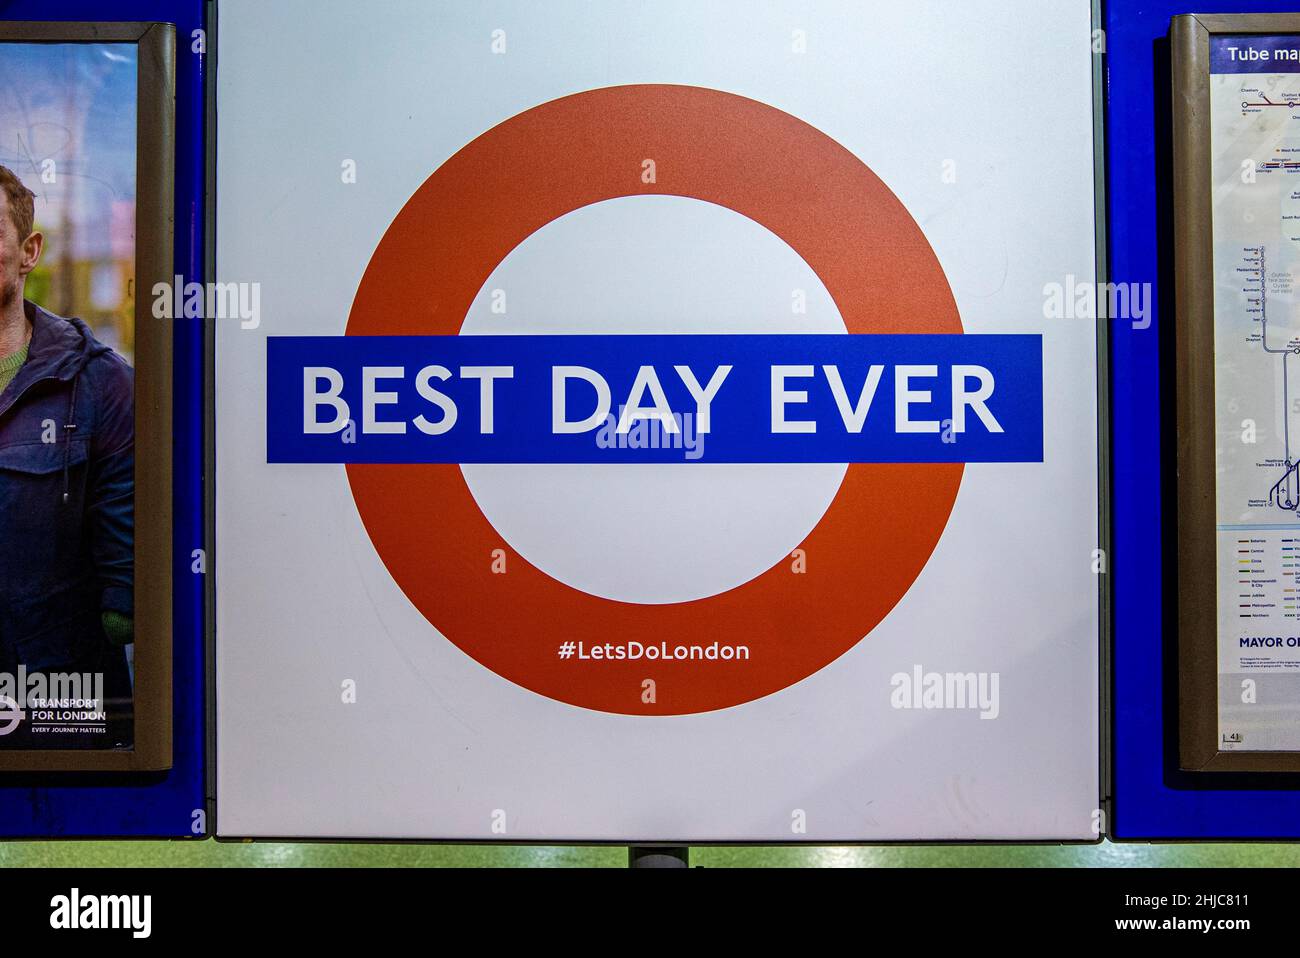 Best day ever roundel sign at london railway station Stock Photo